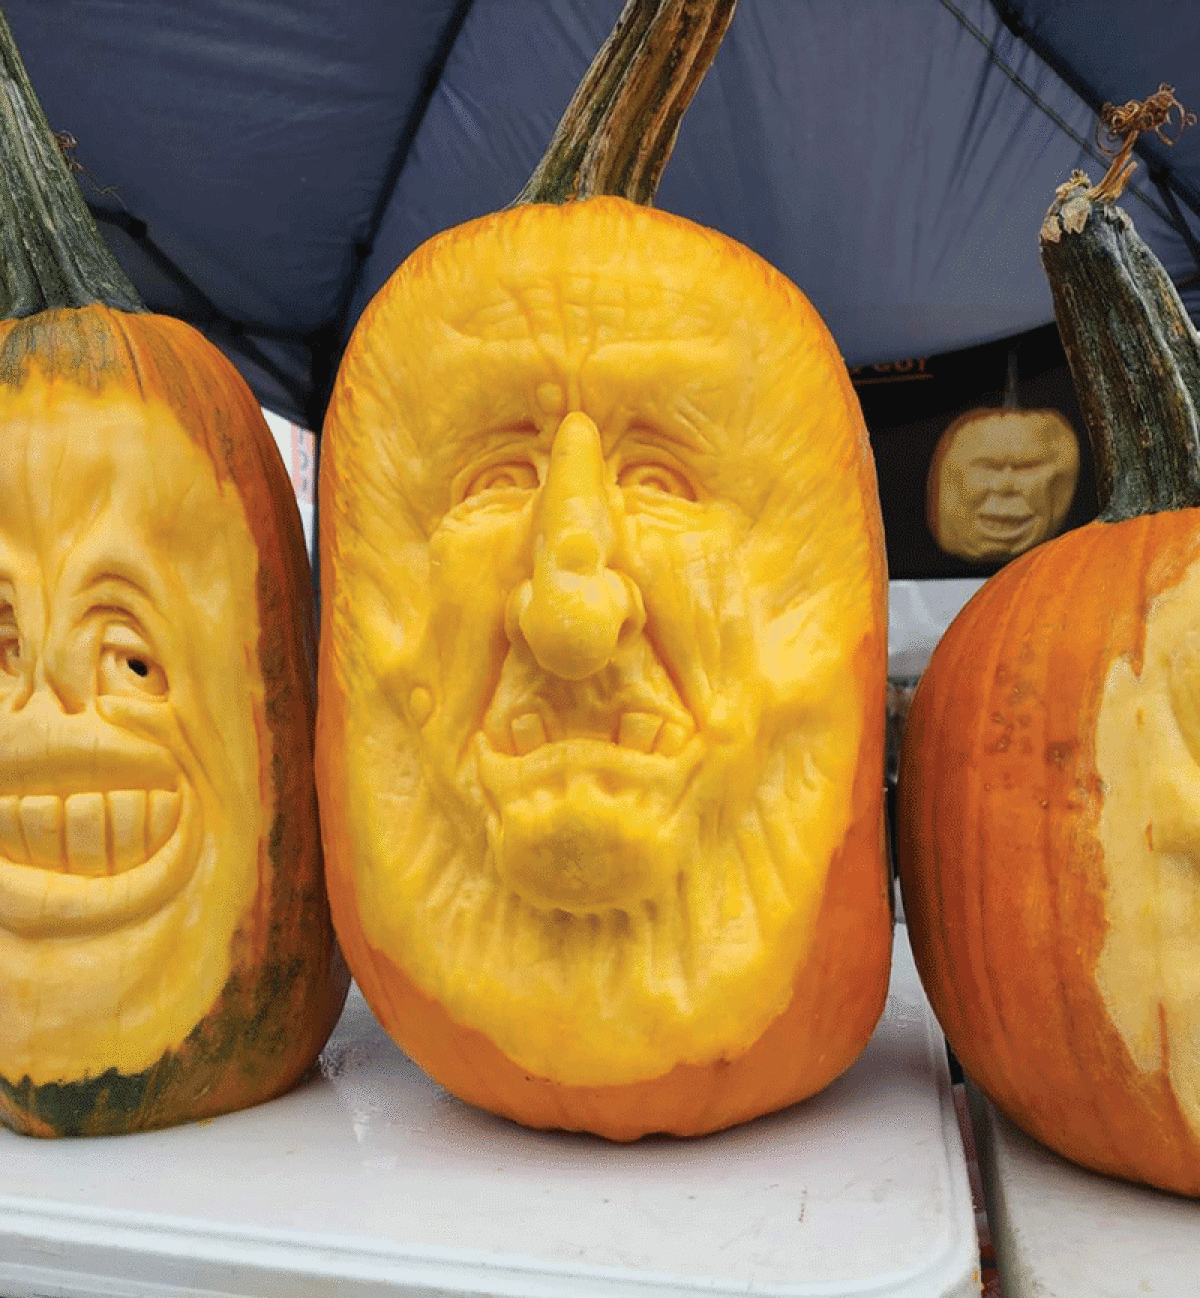  John Angevine has been pumpkin sculpting for about 30 years. There are no perfect ways to preserve carved and sculpted pumpkins, but there are some ways to make them last longer.  